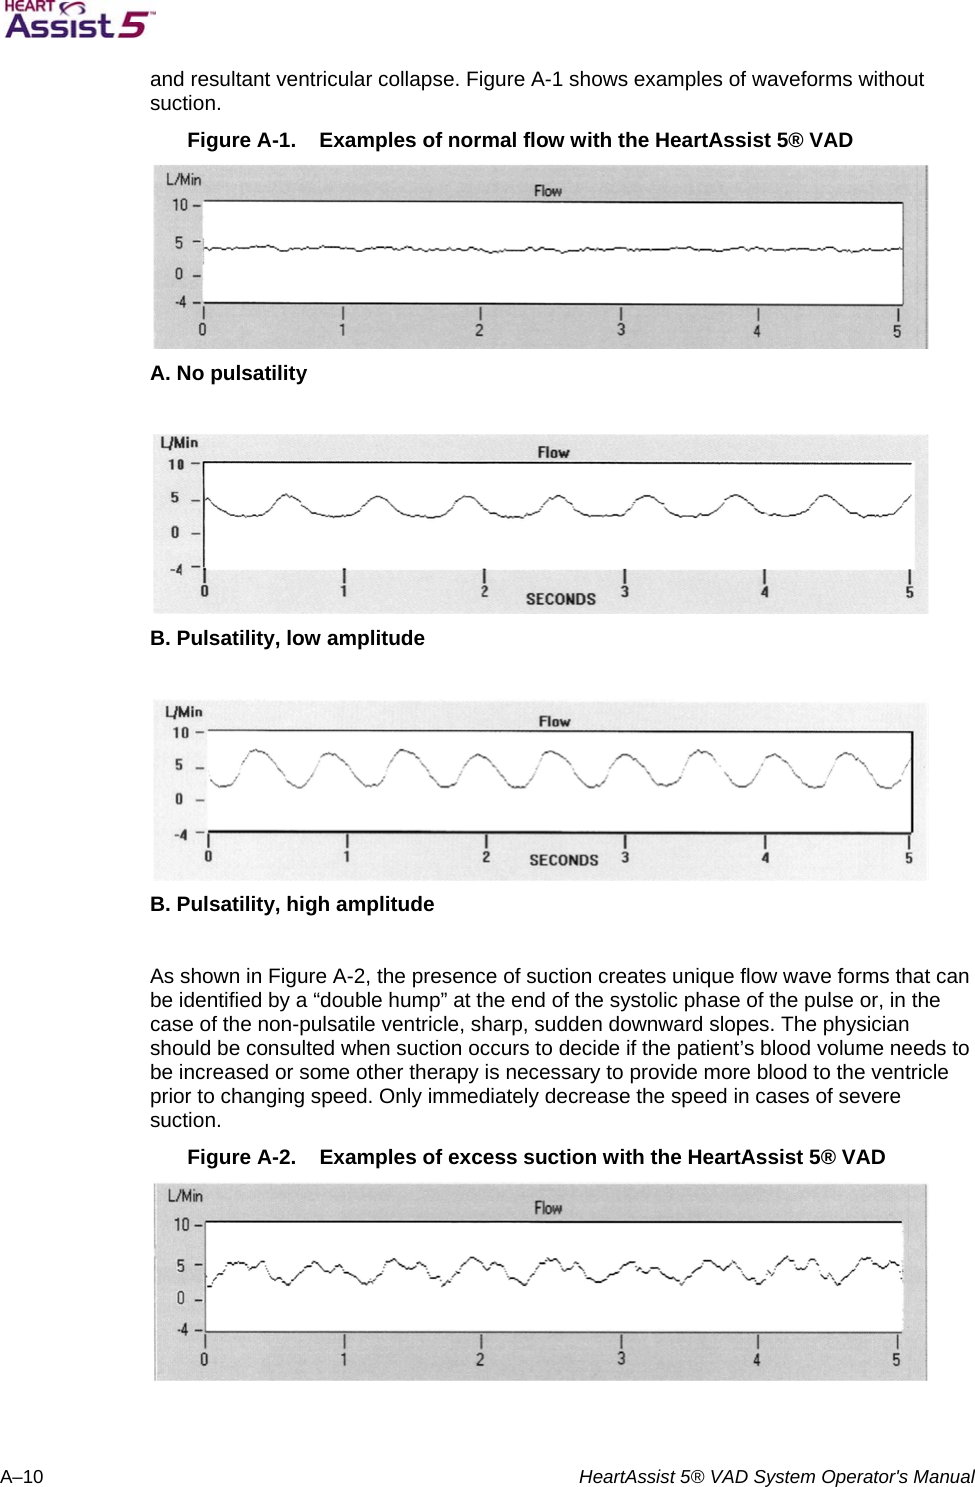   A–10  HeartAssist 5® VAD System Operator&apos;s Manual and resultant ventricular collapse. Figure A-1 shows examples of waveforms without suction.  Figure A-1.  Examples of normal flow with the HeartAssist 5® VAD   A. No pulsatility   B. Pulsatility, low amplitude   B. Pulsatility, high amplitude  As shown in Figure A-2, the presence of suction creates unique flow wave forms that can be identified by a “double hump” at the end of the systolic phase of the pulse or, in the case of the non-pulsatile ventricle, sharp, sudden downward slopes. The physician should be consulted when suction occurs to decide if the patient’s blood volume needs to be increased or some other therapy is necessary to provide more blood to the ventricle prior to changing speed. Only immediately decrease the speed in cases of severe suction.  Figure A-2.  Examples of excess suction with the HeartAssist 5® VAD   